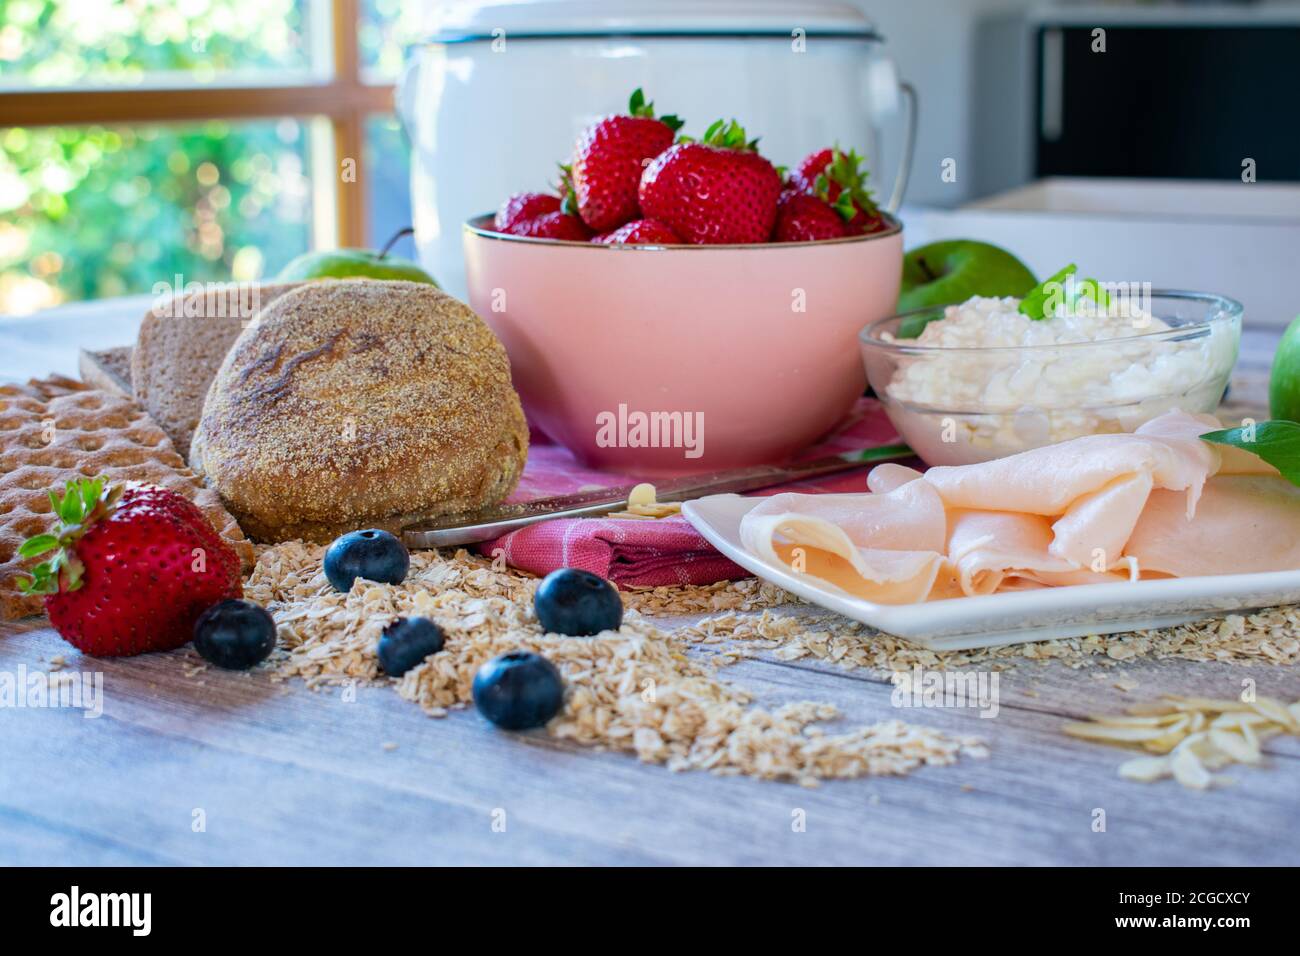 Healthy breakfast  whole food  low fat , low calorie bread, fruits and proteins Stock Photo